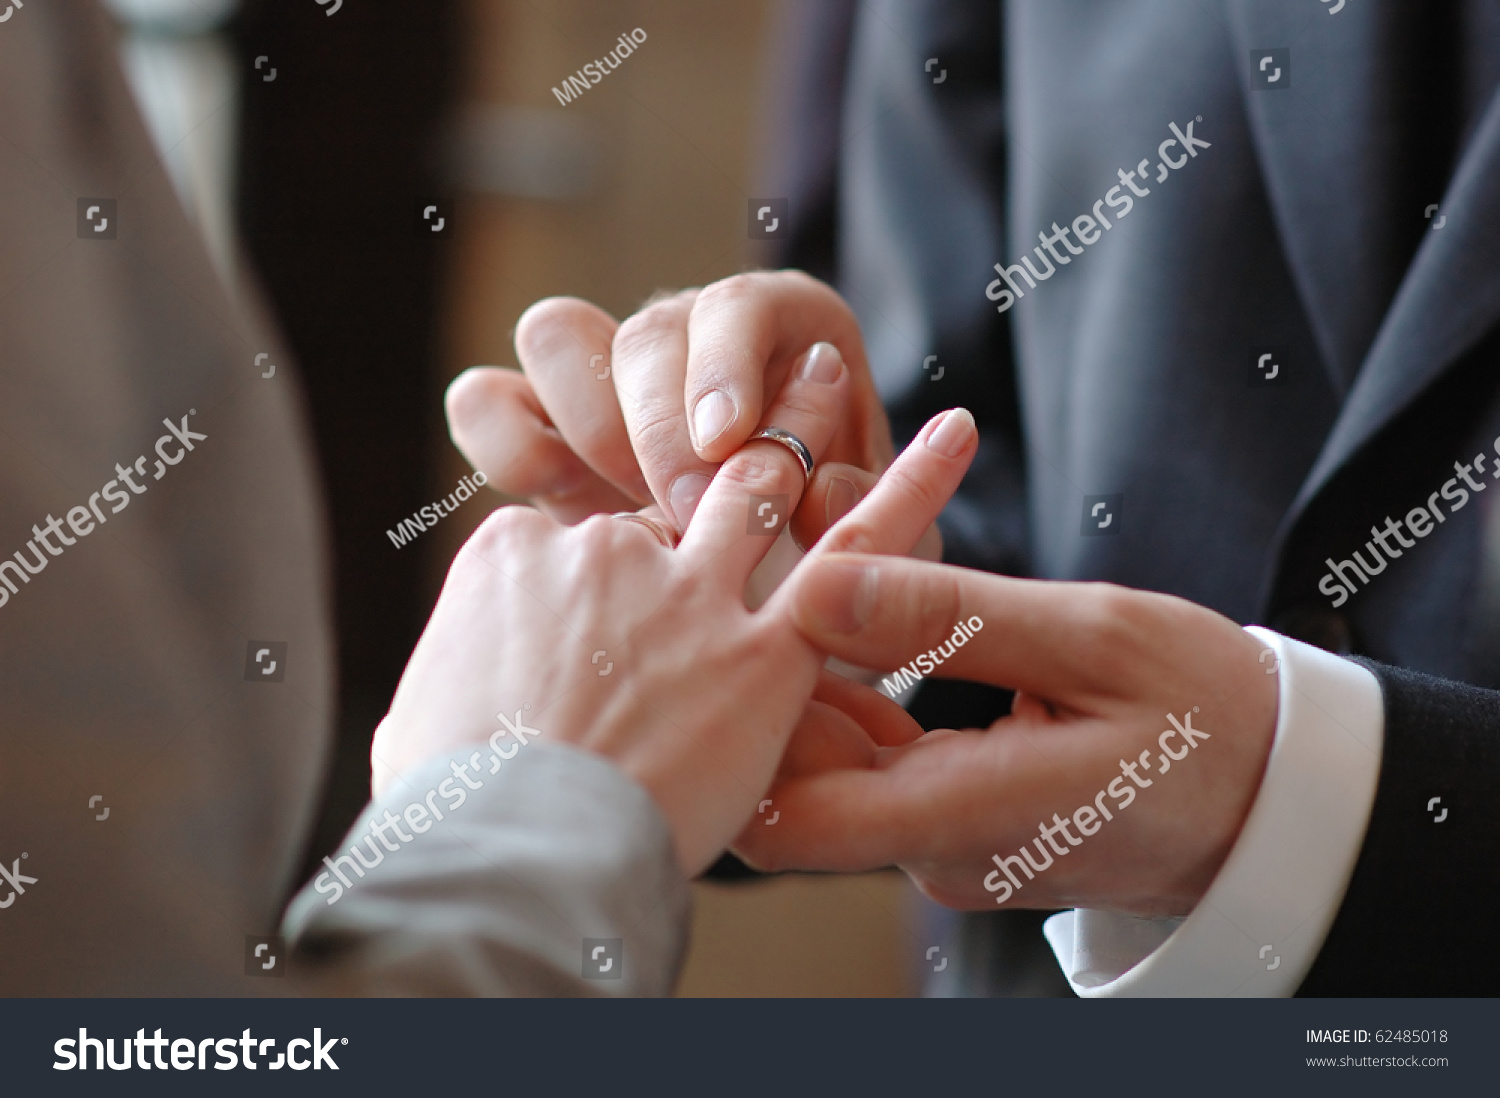 Groom putting a wedding ring on bride's finger #62485018